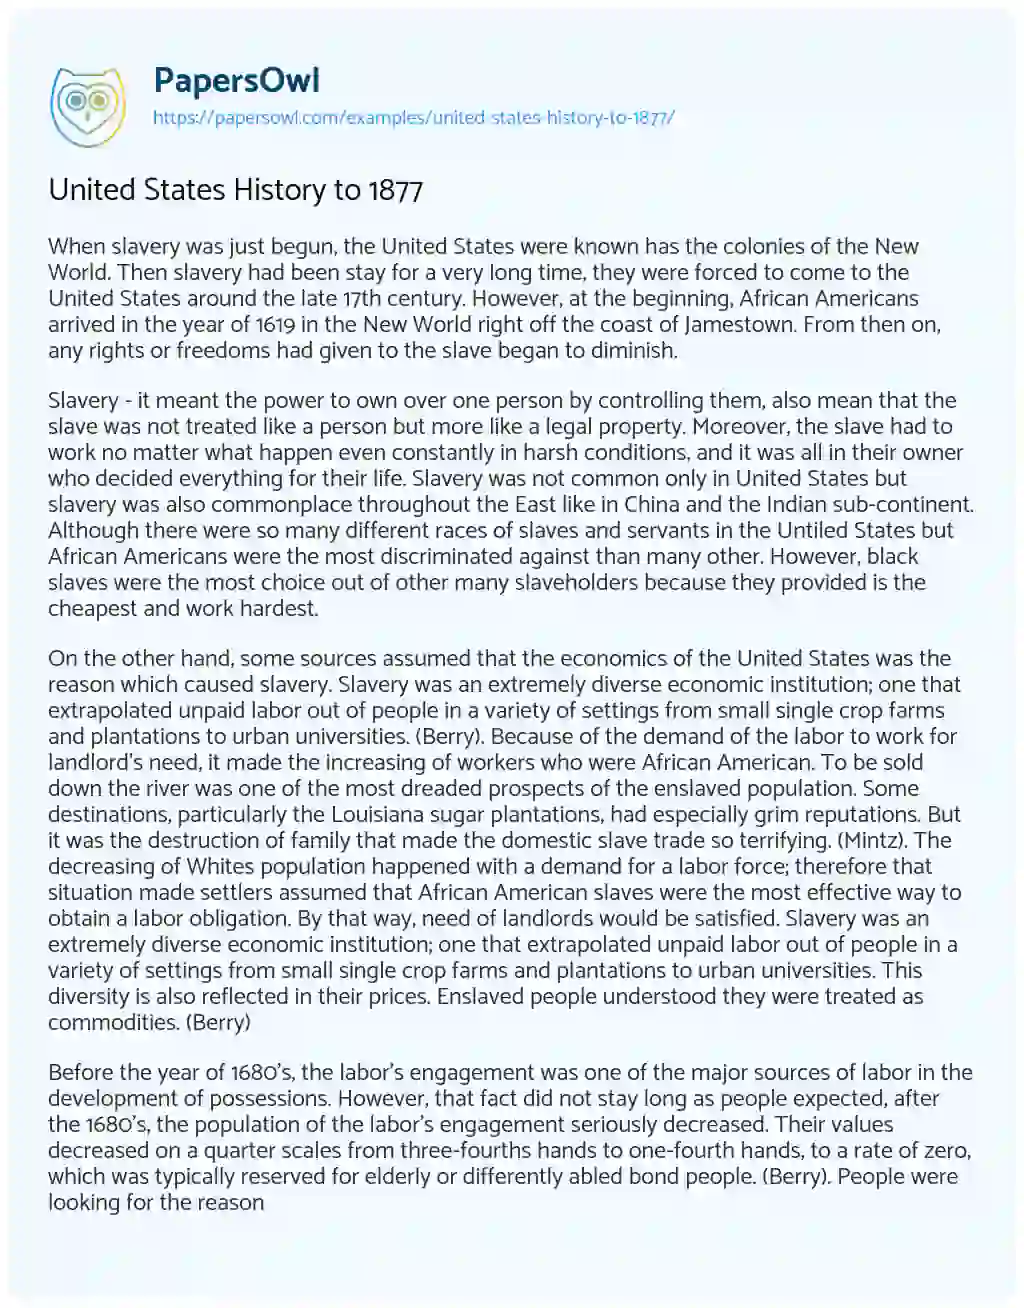 United States History to 1877 essay